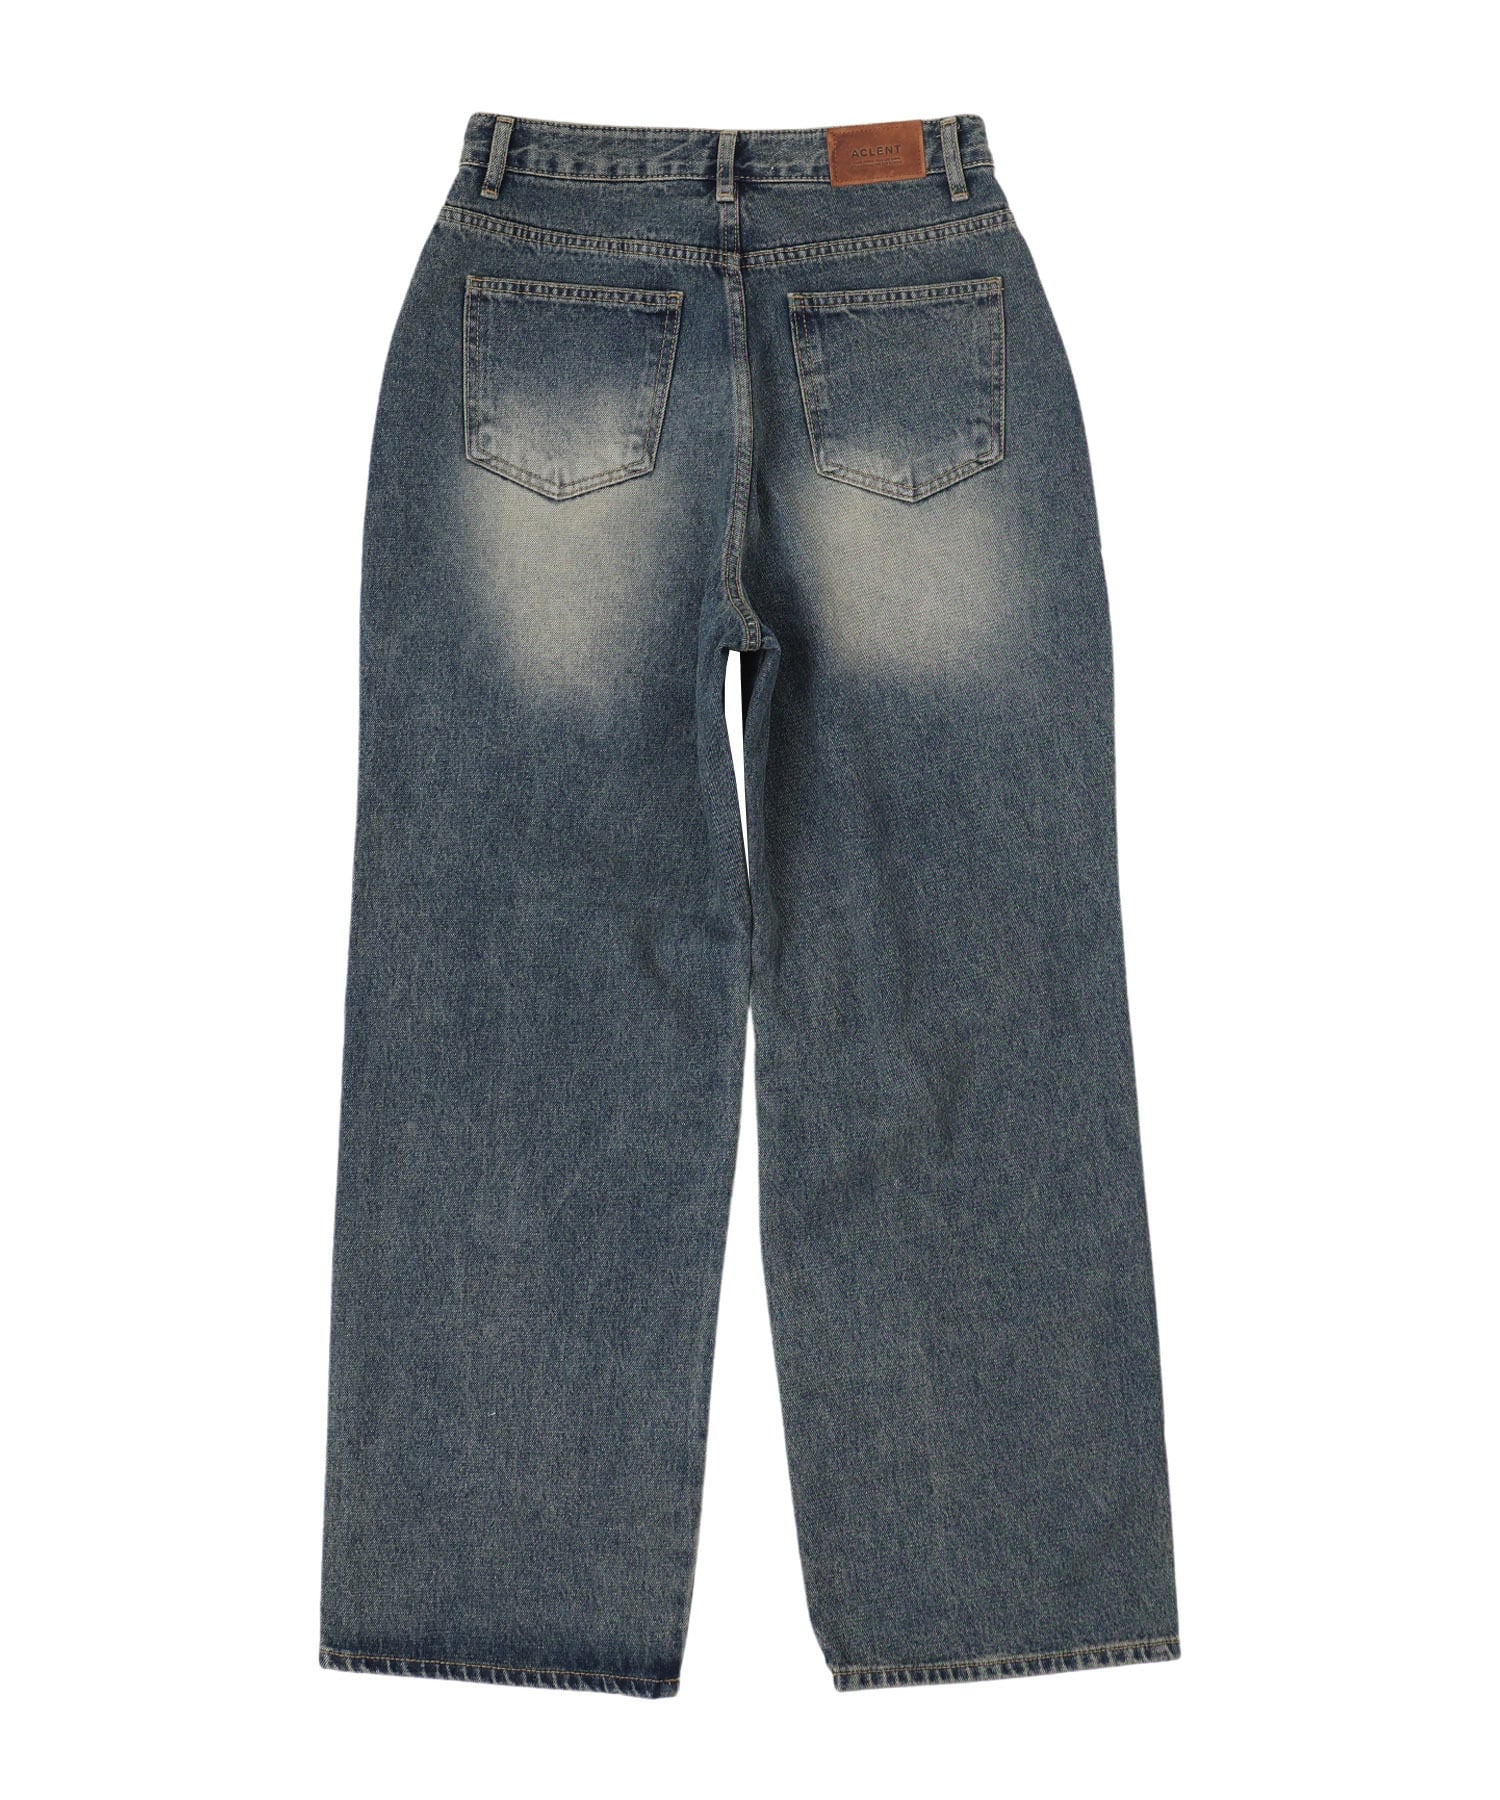 Boy friend washed jeans | ACLENT（アクレント）